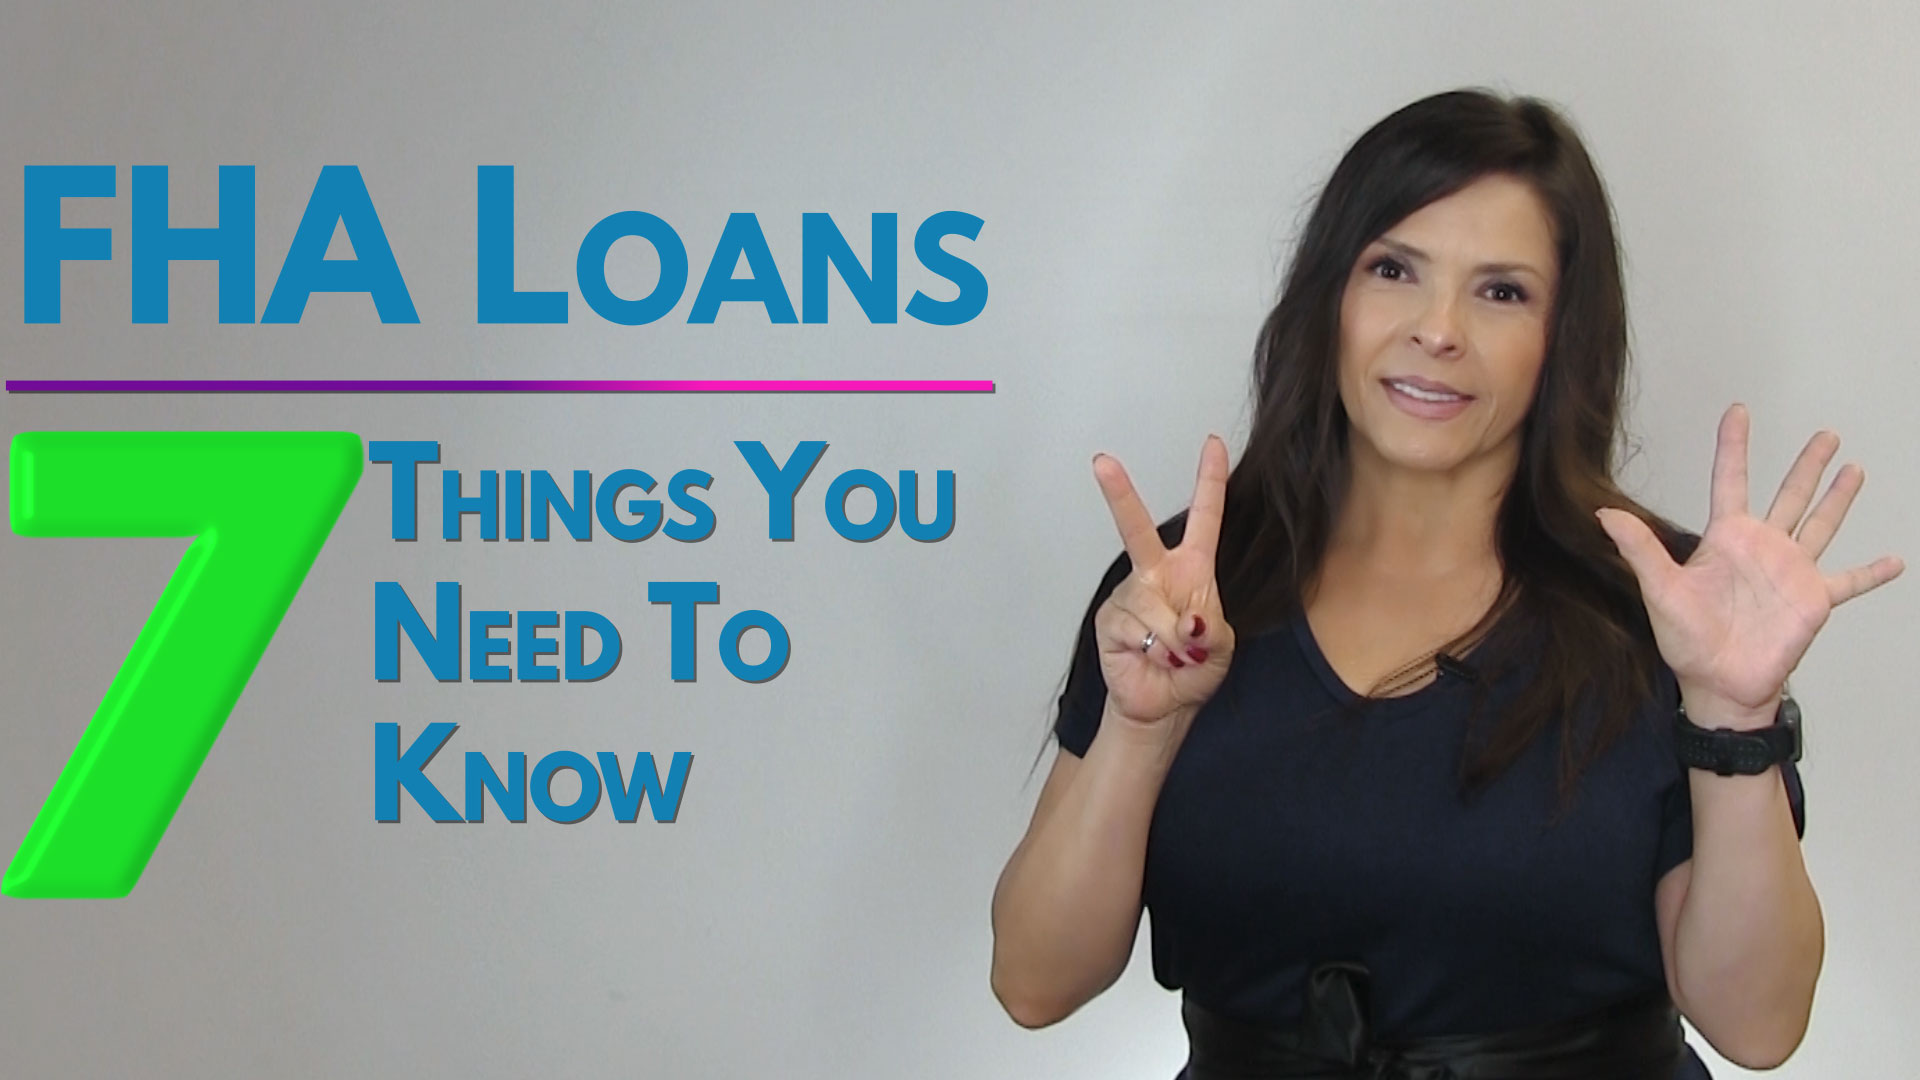 7 things you need to know about FHA loans